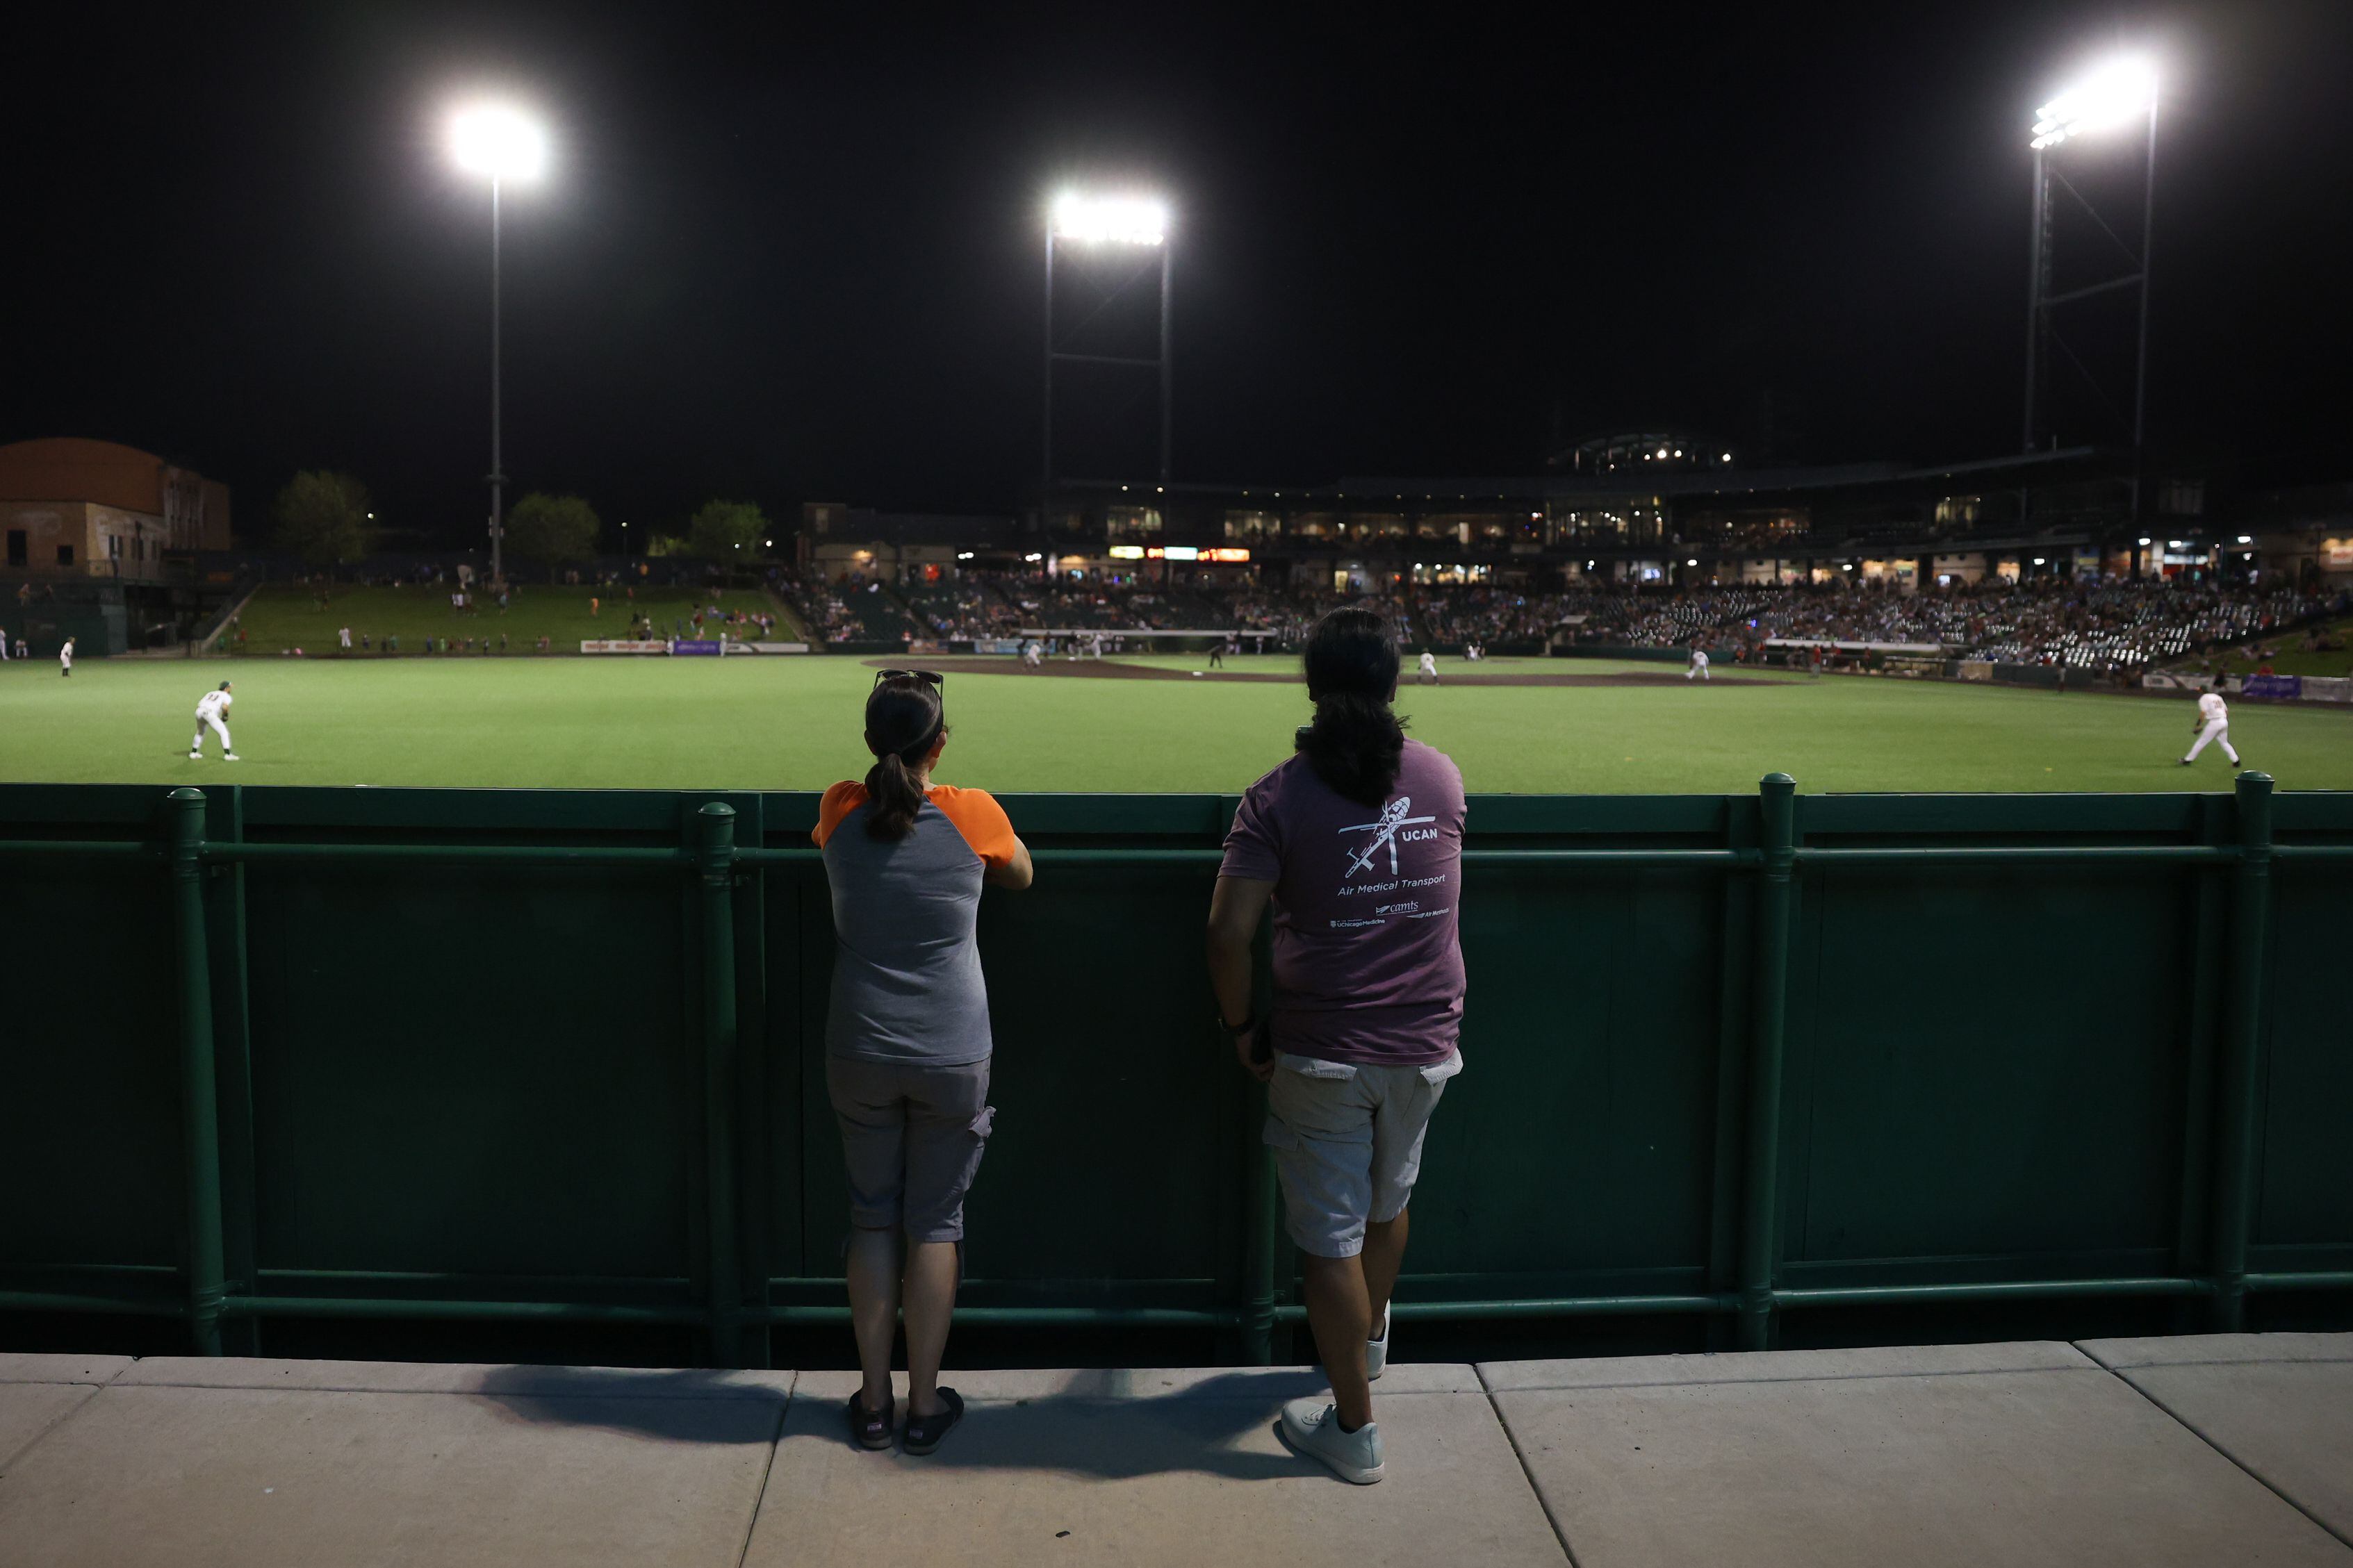 Laura Nurczyk and Randy Pachao, of Joliet, watch the Joliet Slammers take on the Ottawa Titans from left field. Friday, May 13, 2022, in Joliet.